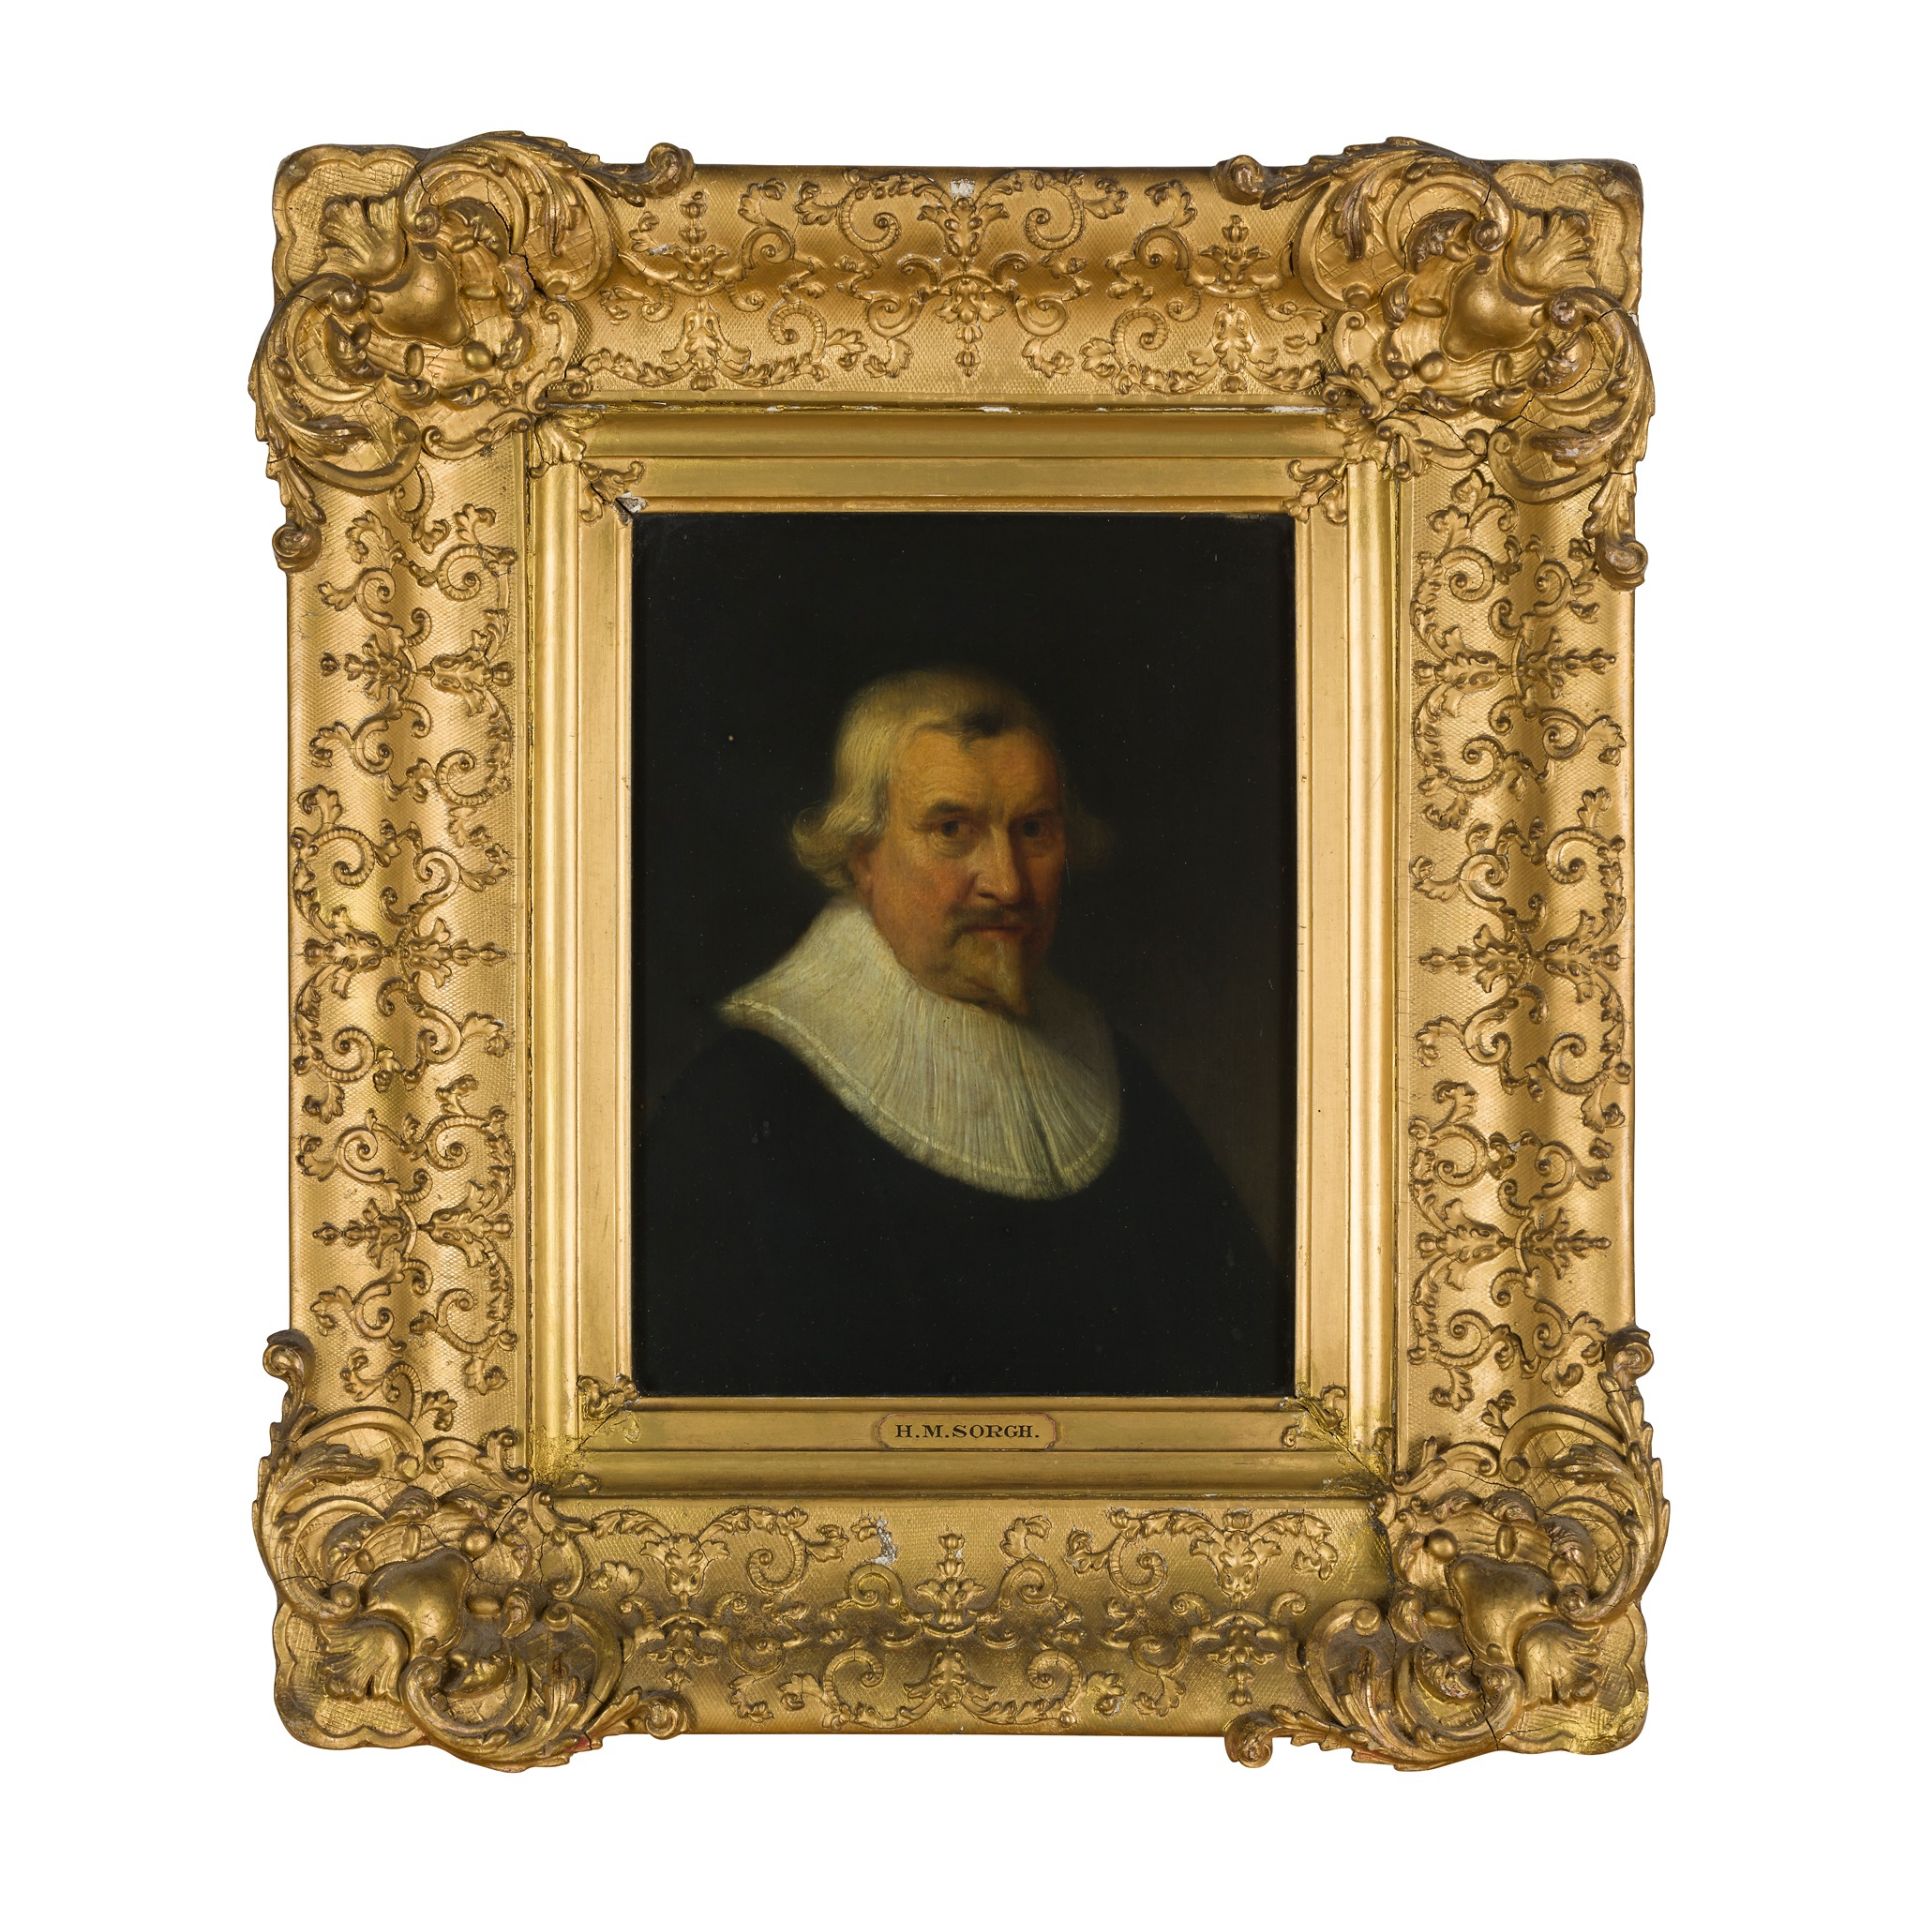 ATTRIBUTED TO HENDRICK MARTENSZ SORGH HEAD AND SHOULDER PORTRAIT OF A MAN WITH RUFF - Image 2 of 4